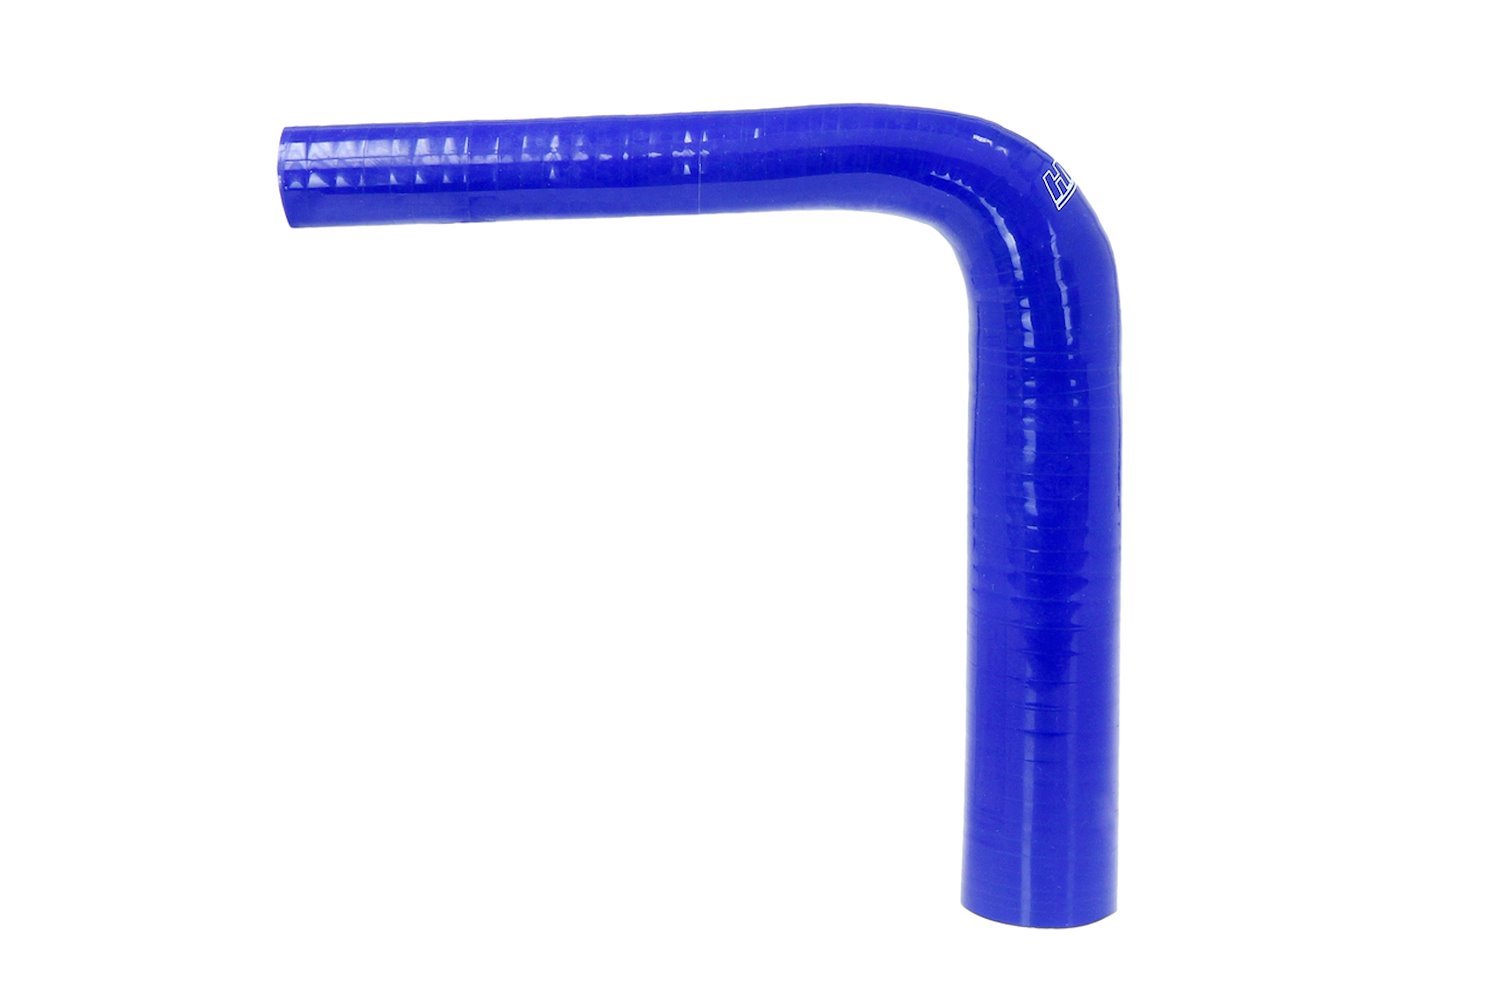 HTSER90-175-225-BLUE Silicone 90-Degree Elbow Hose, High-Temp 4-Ply Reinforced, 1-3/4 in. - 2-1/4 in. ID, Blue